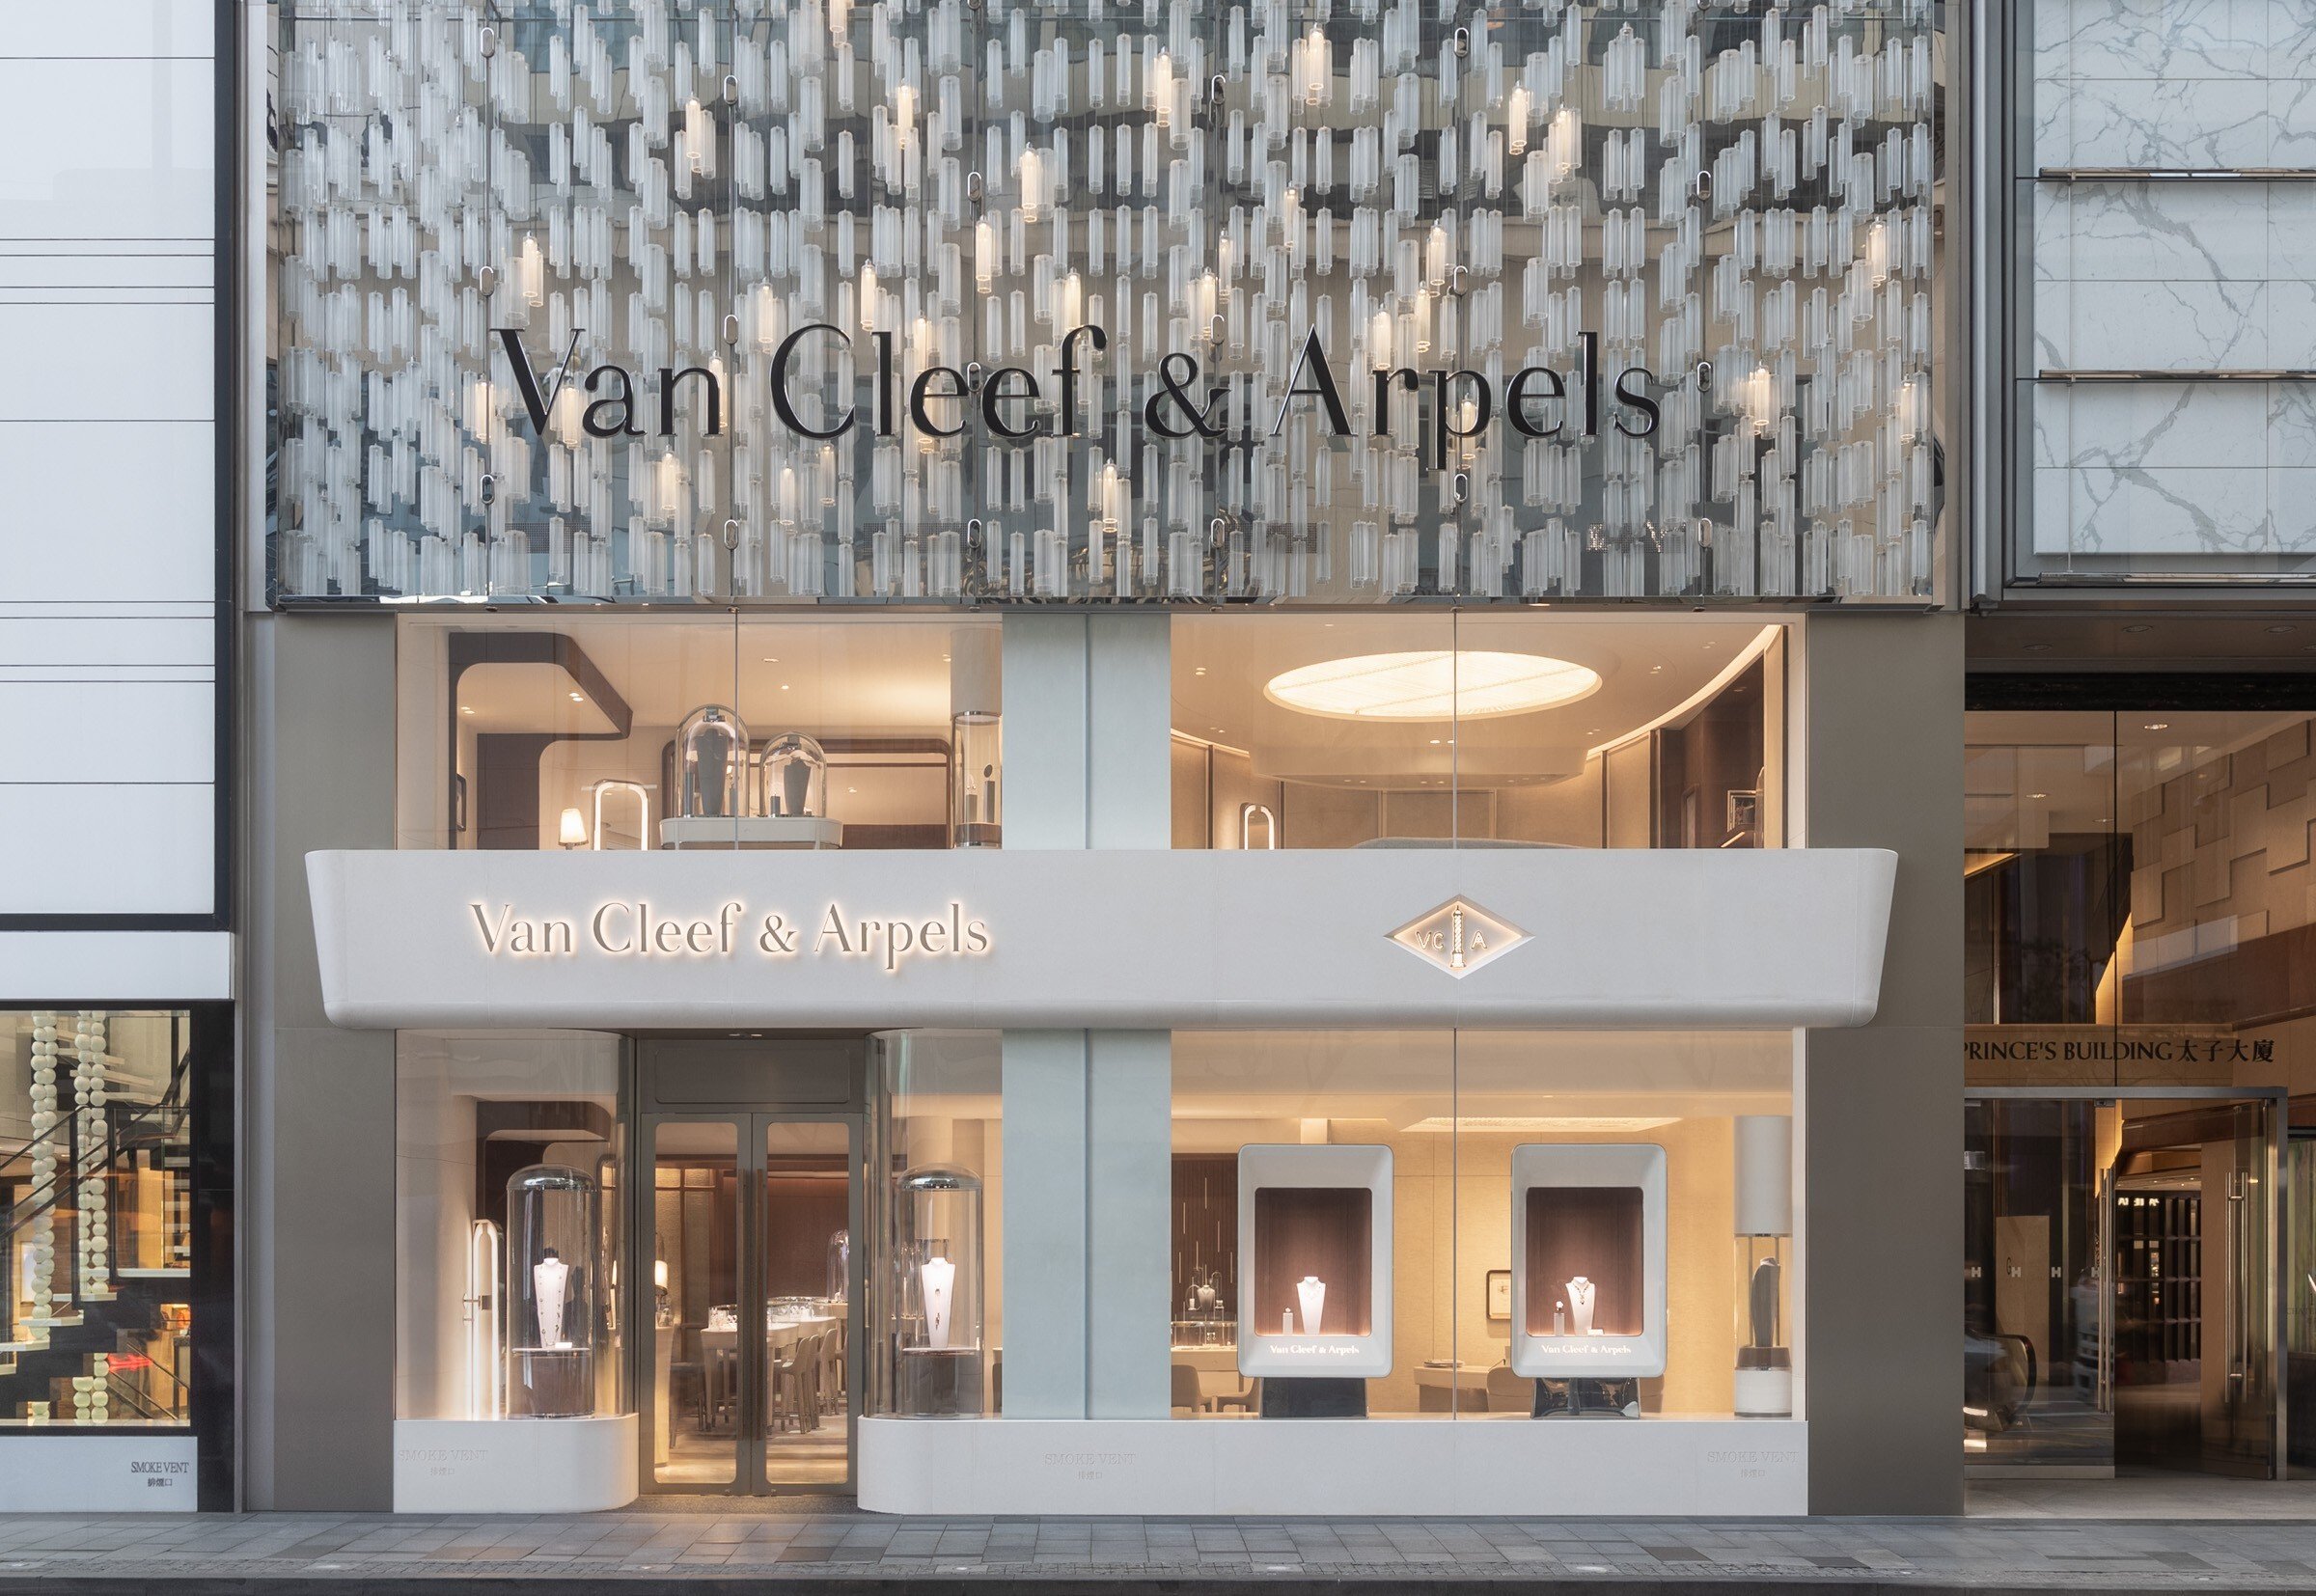 STYLE Edit: Van Cleef & Arpels' newly refurbished Hong Kong store combines its iconic former features with the city's quintessential nature and architecture to dazzling effect | South China Morning Post